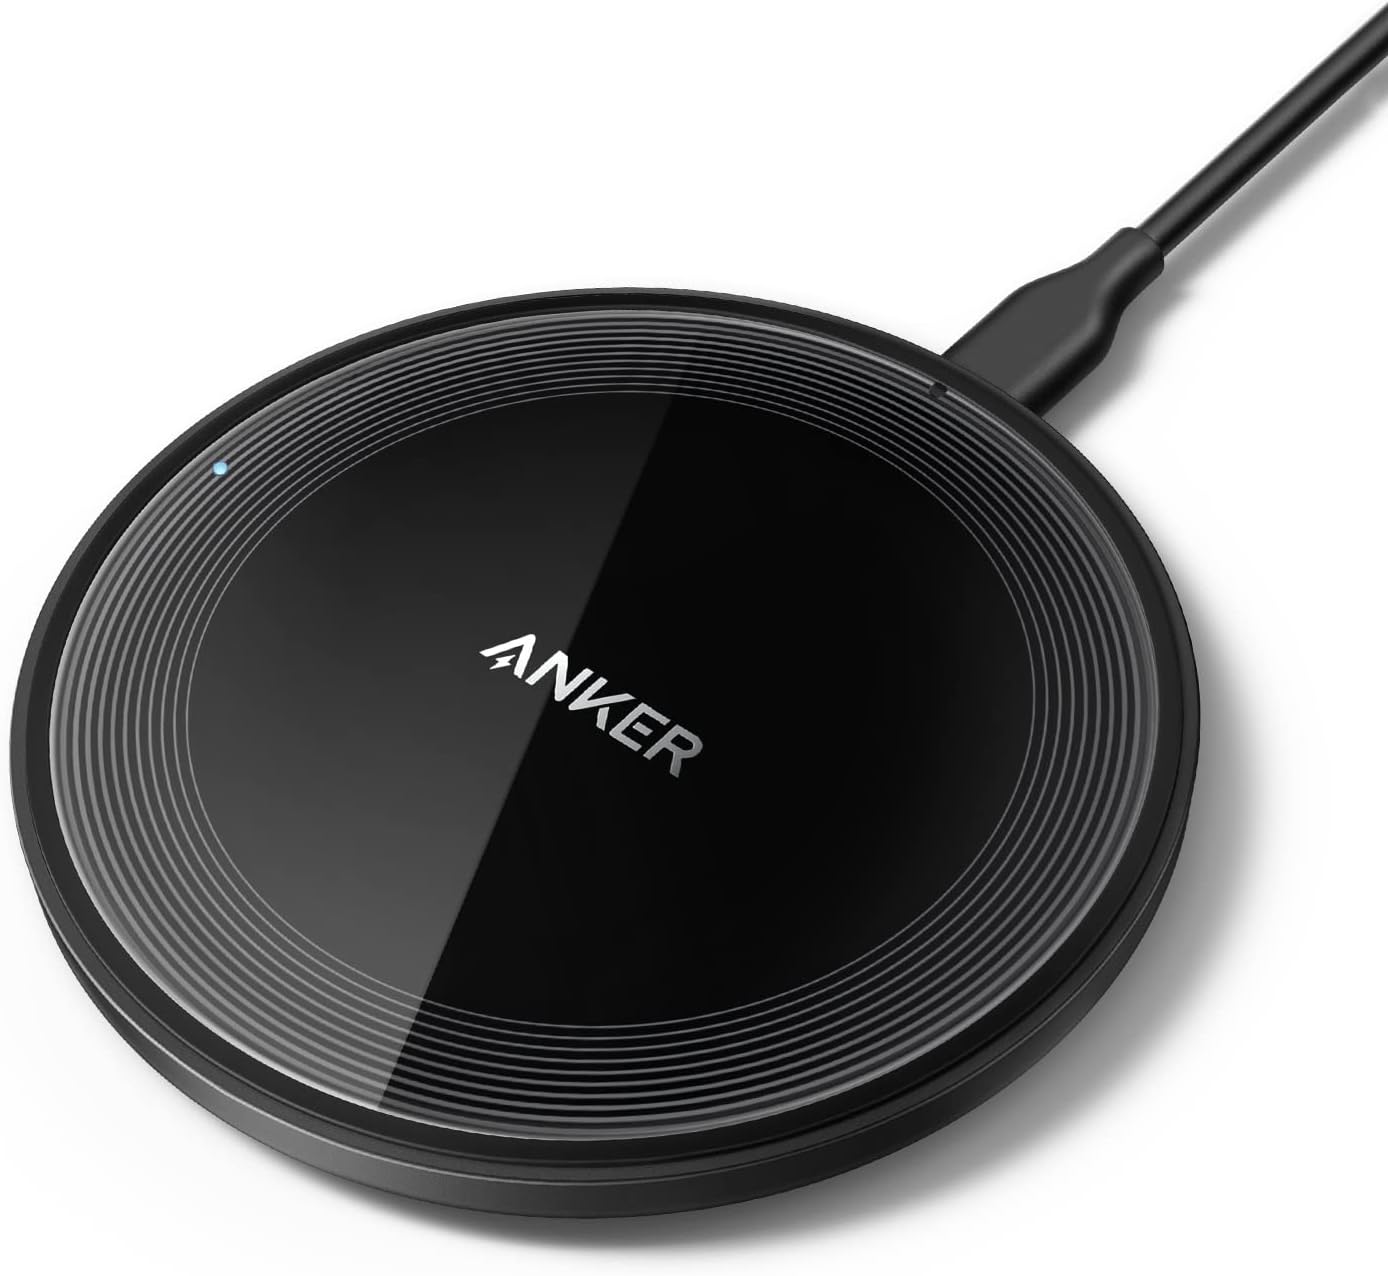 Anker 315 Wireless Charger (Pad), 10W Max Fast Cha...